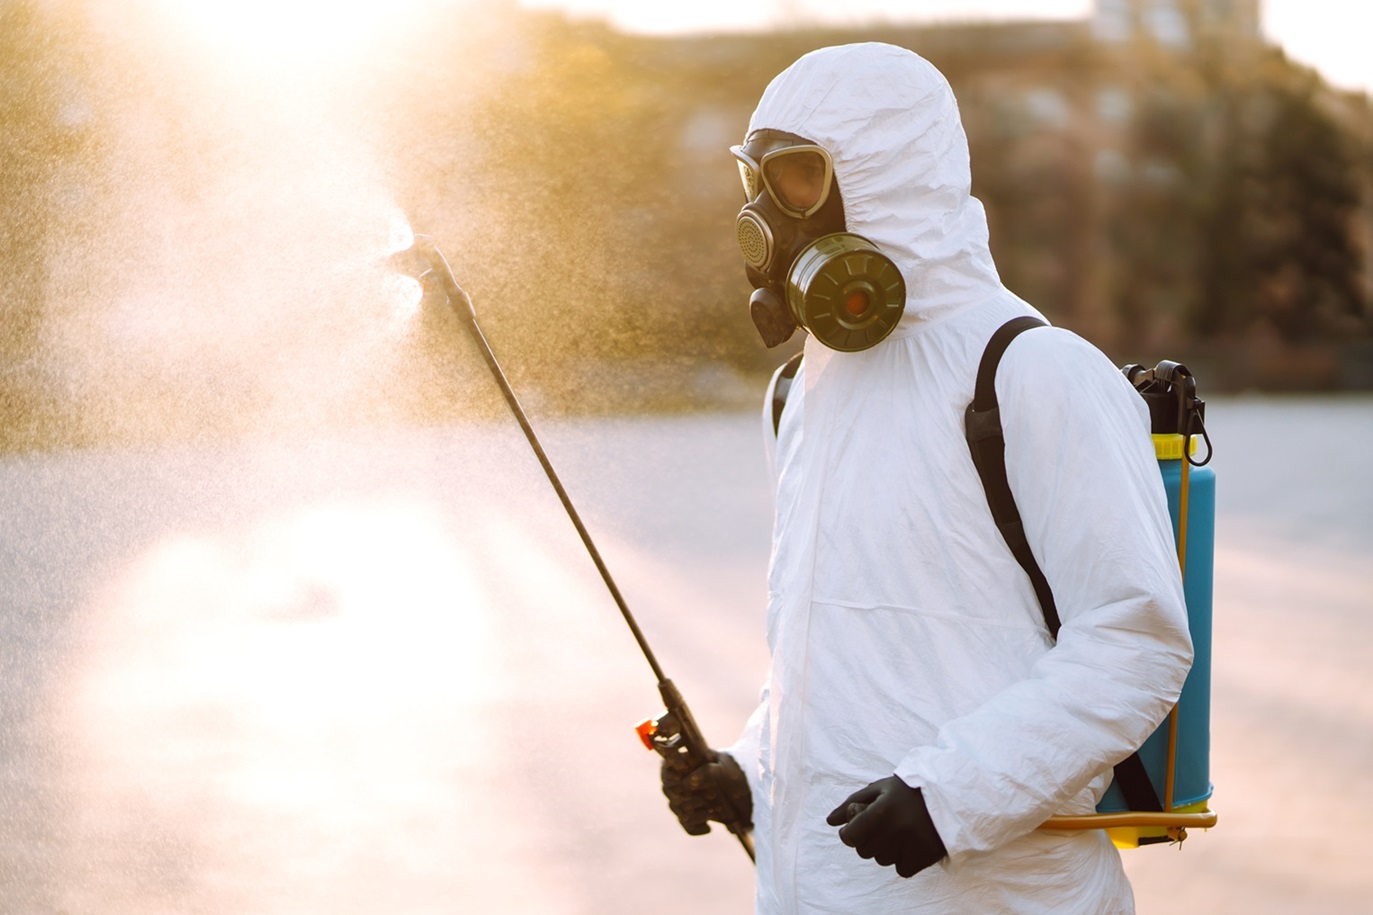 Benefits of Professional Pest Control Services